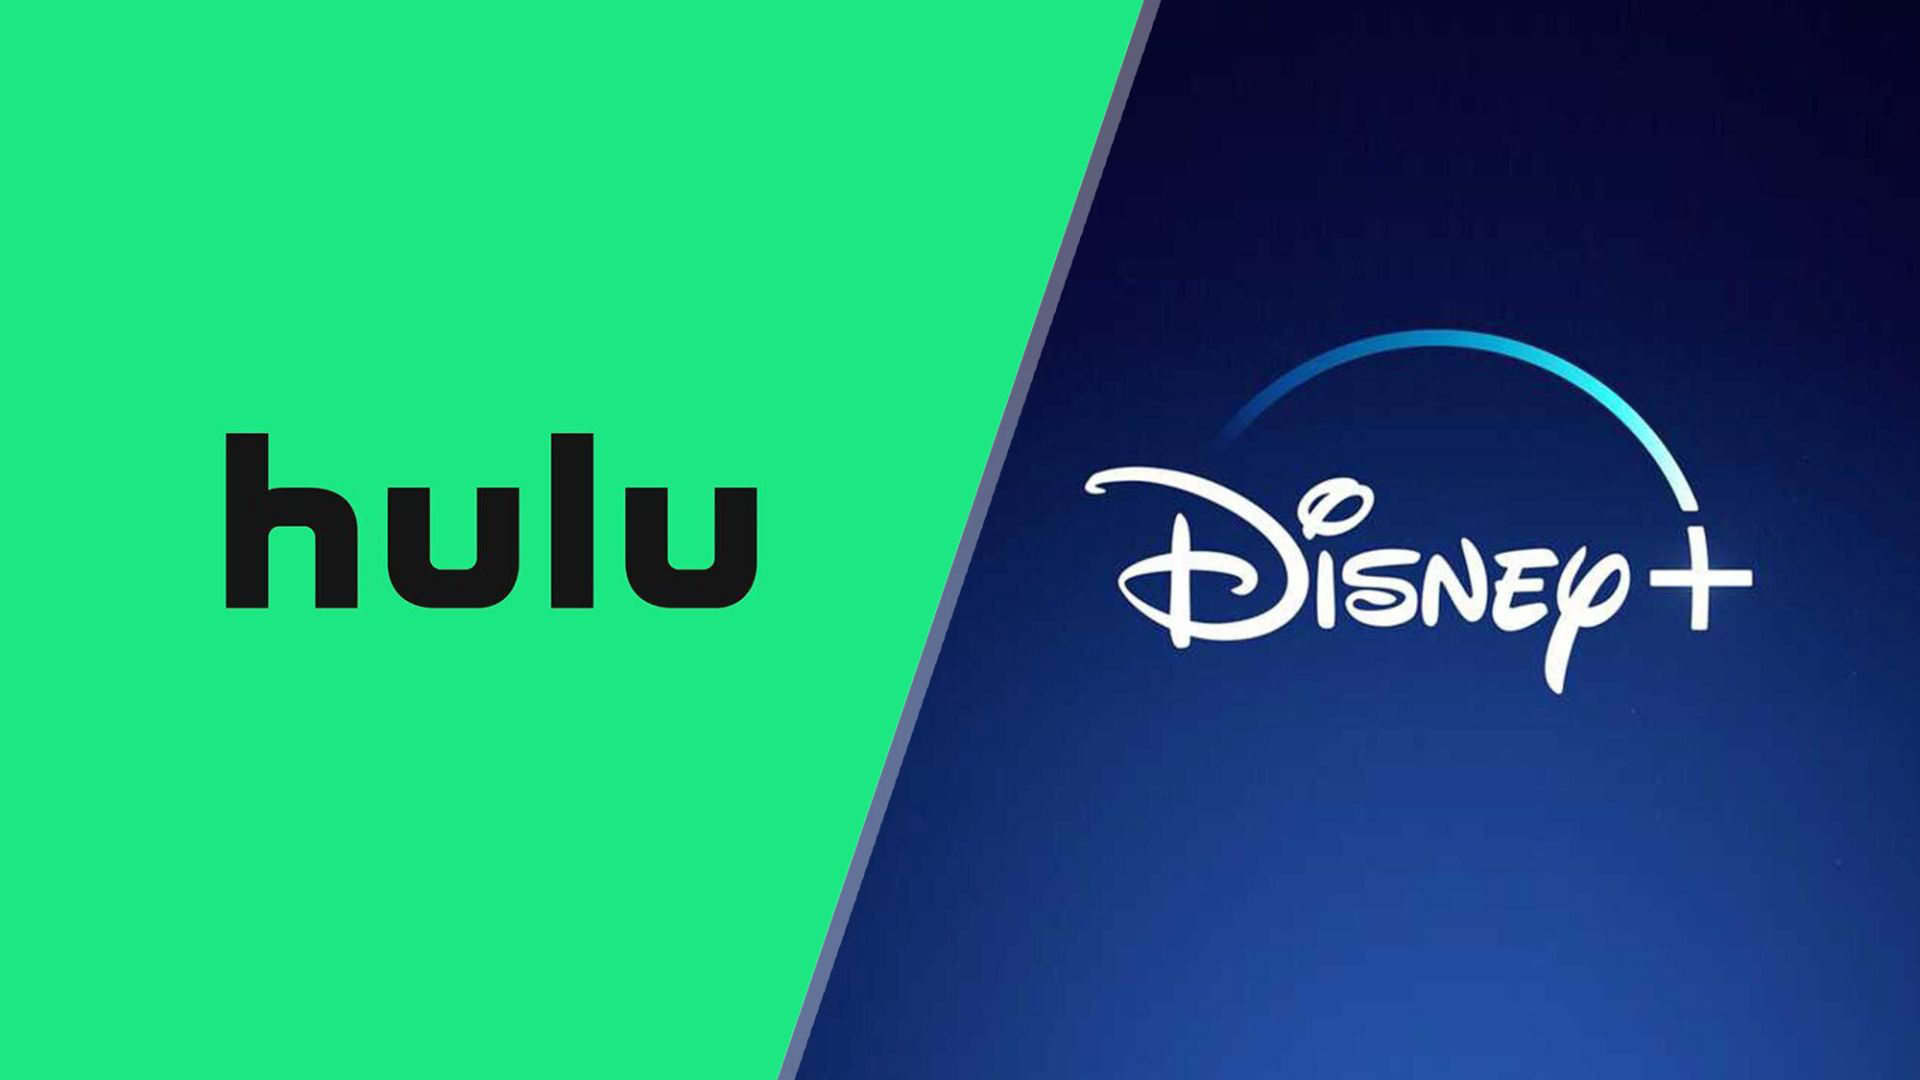 Ends today! Disney Plus + Hulu bundle deal is just 2.99 a month